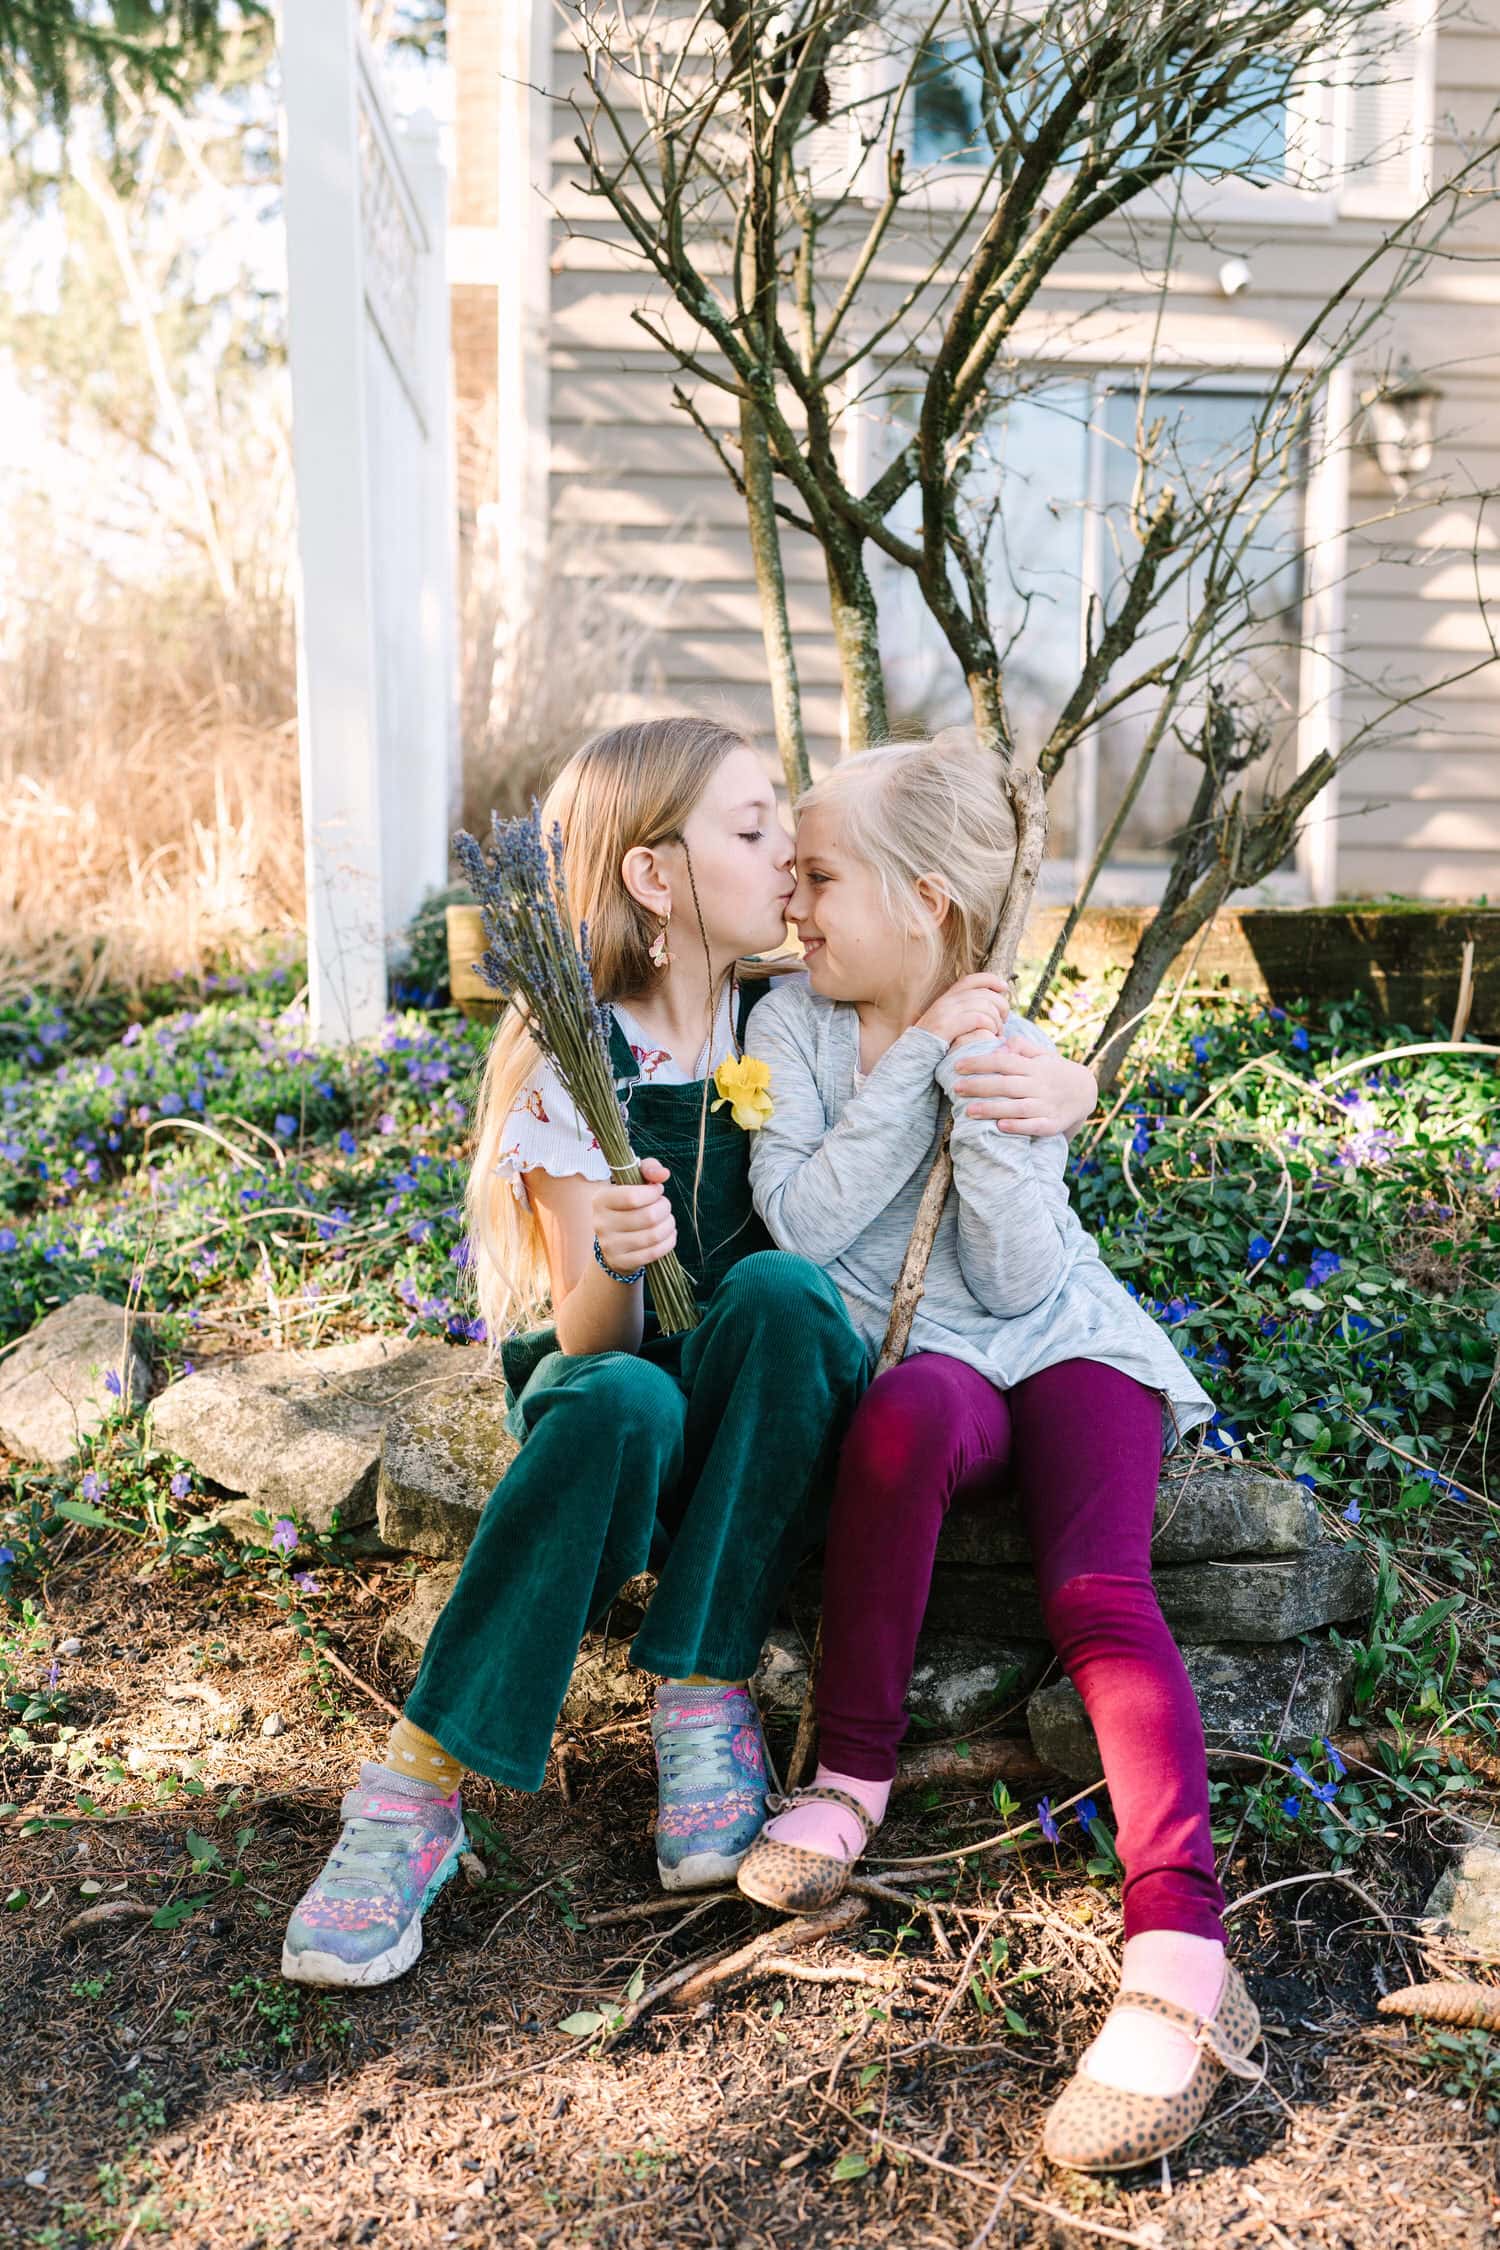 Young sisters holding flowers share a sweet embrace in the Springtime.